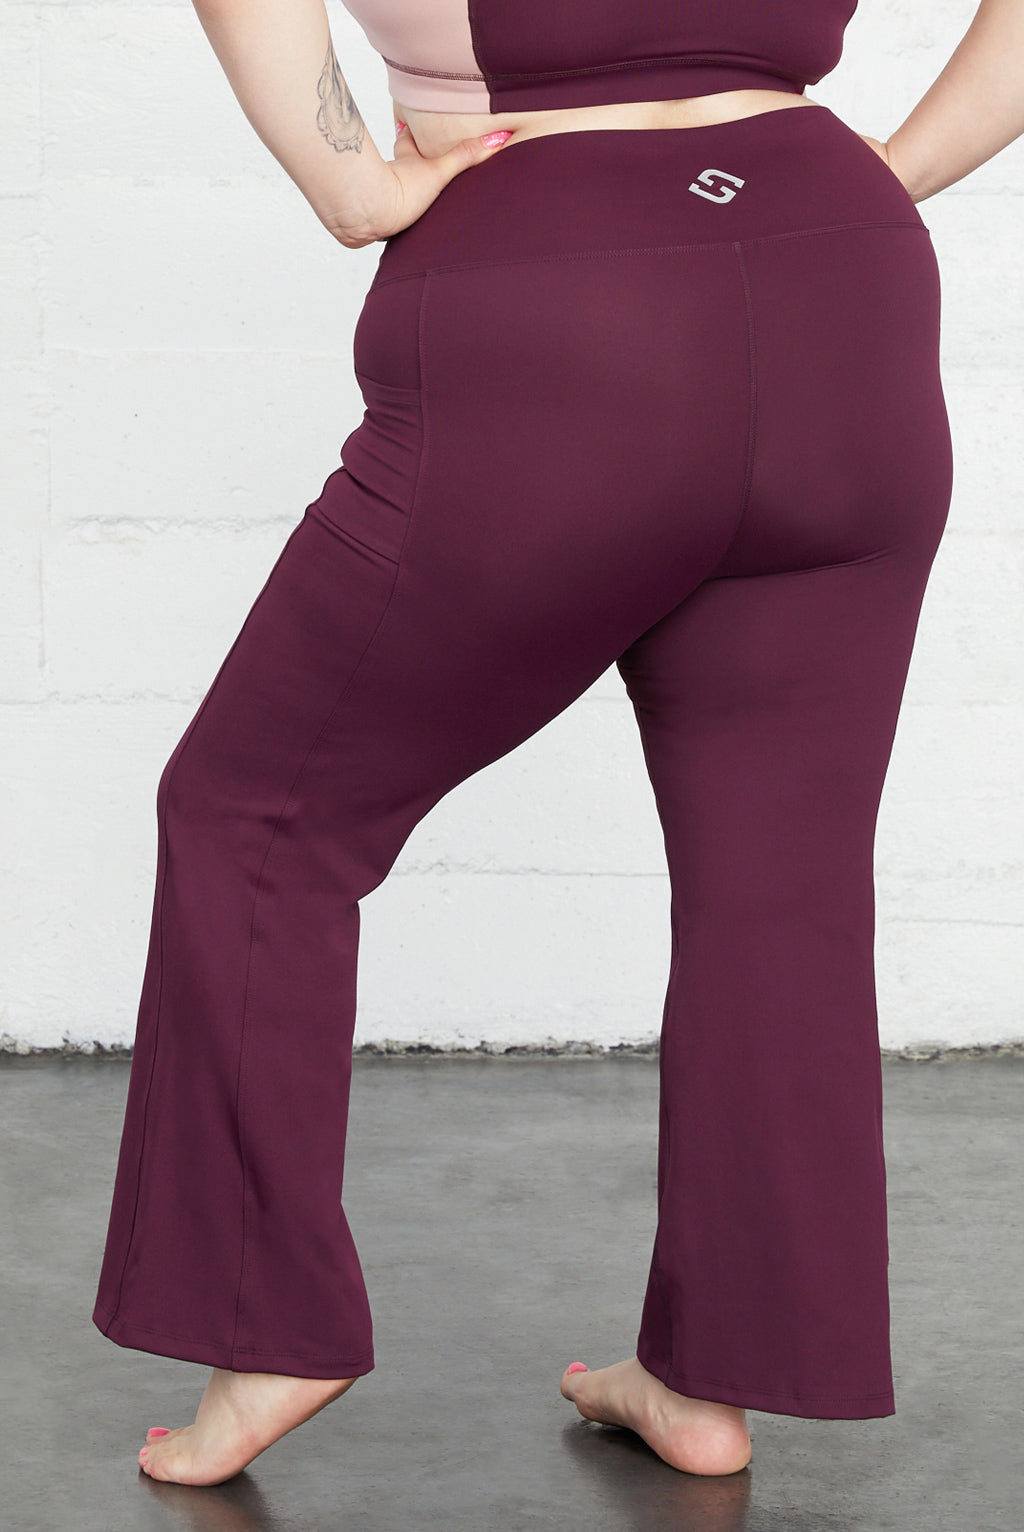 Glamour - 21 Best Flared Leggings for Yoga, Lounging, and